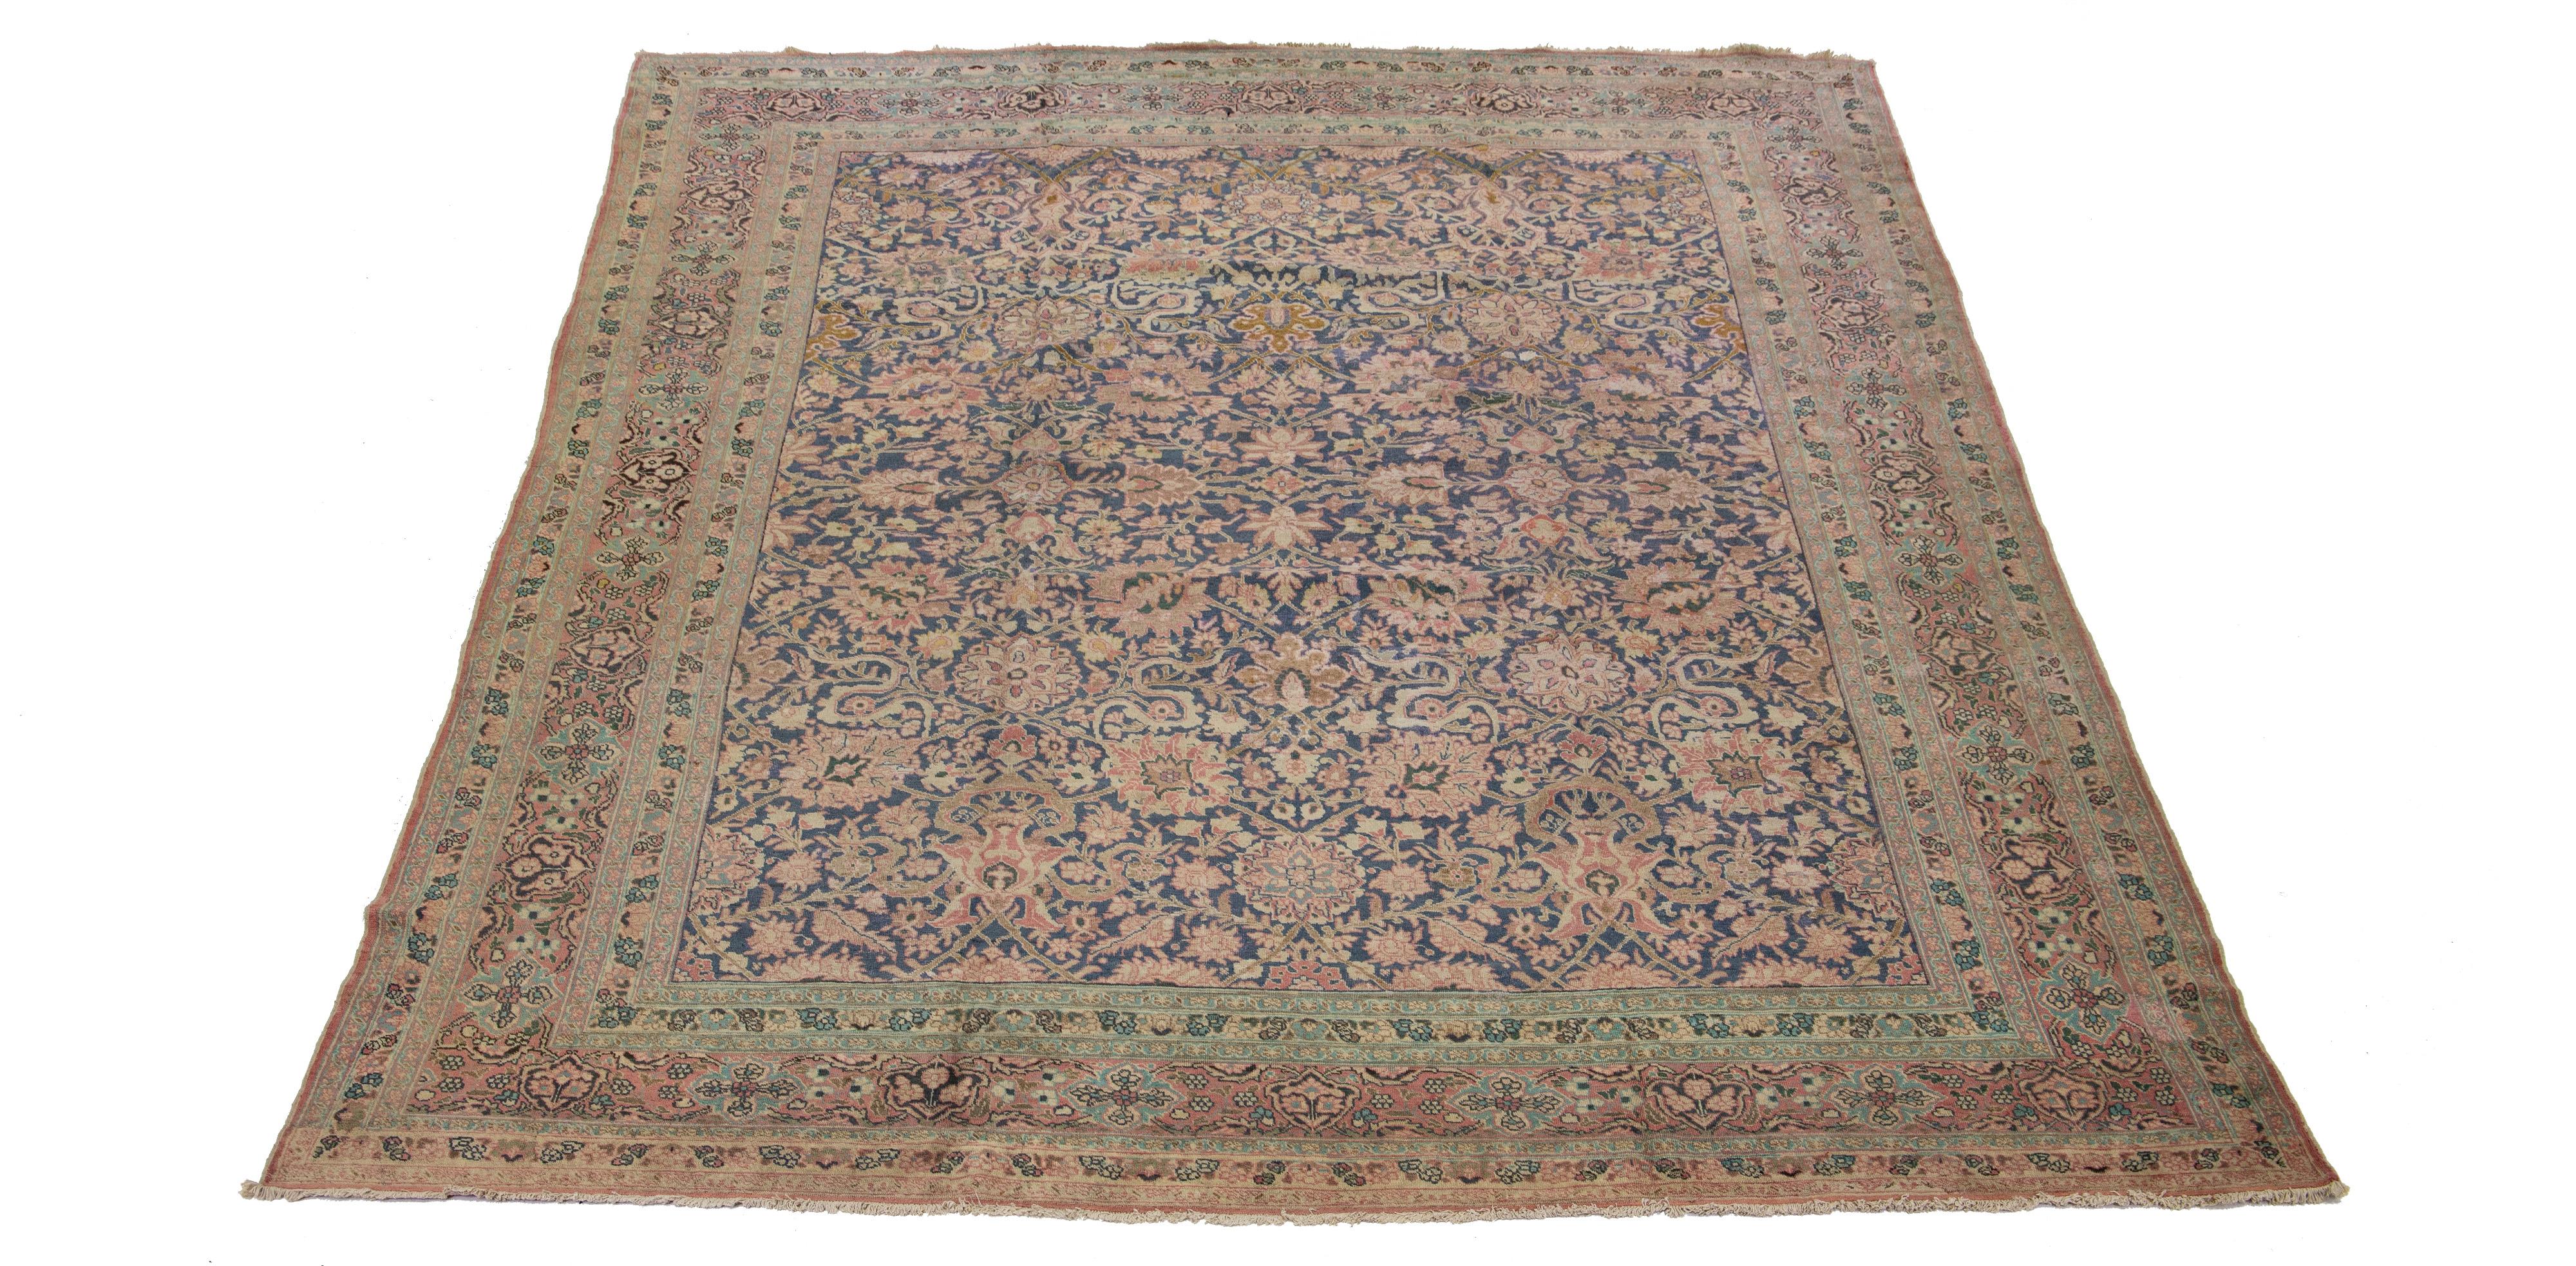 The handcrafted Persian Tabriz wool rug from the 1920s features a stunning, traditional rosette design. A bold teal and pink coloring accentuate the pattern, uniquely contrasting the rug's blue background.

This rug measures 10'10